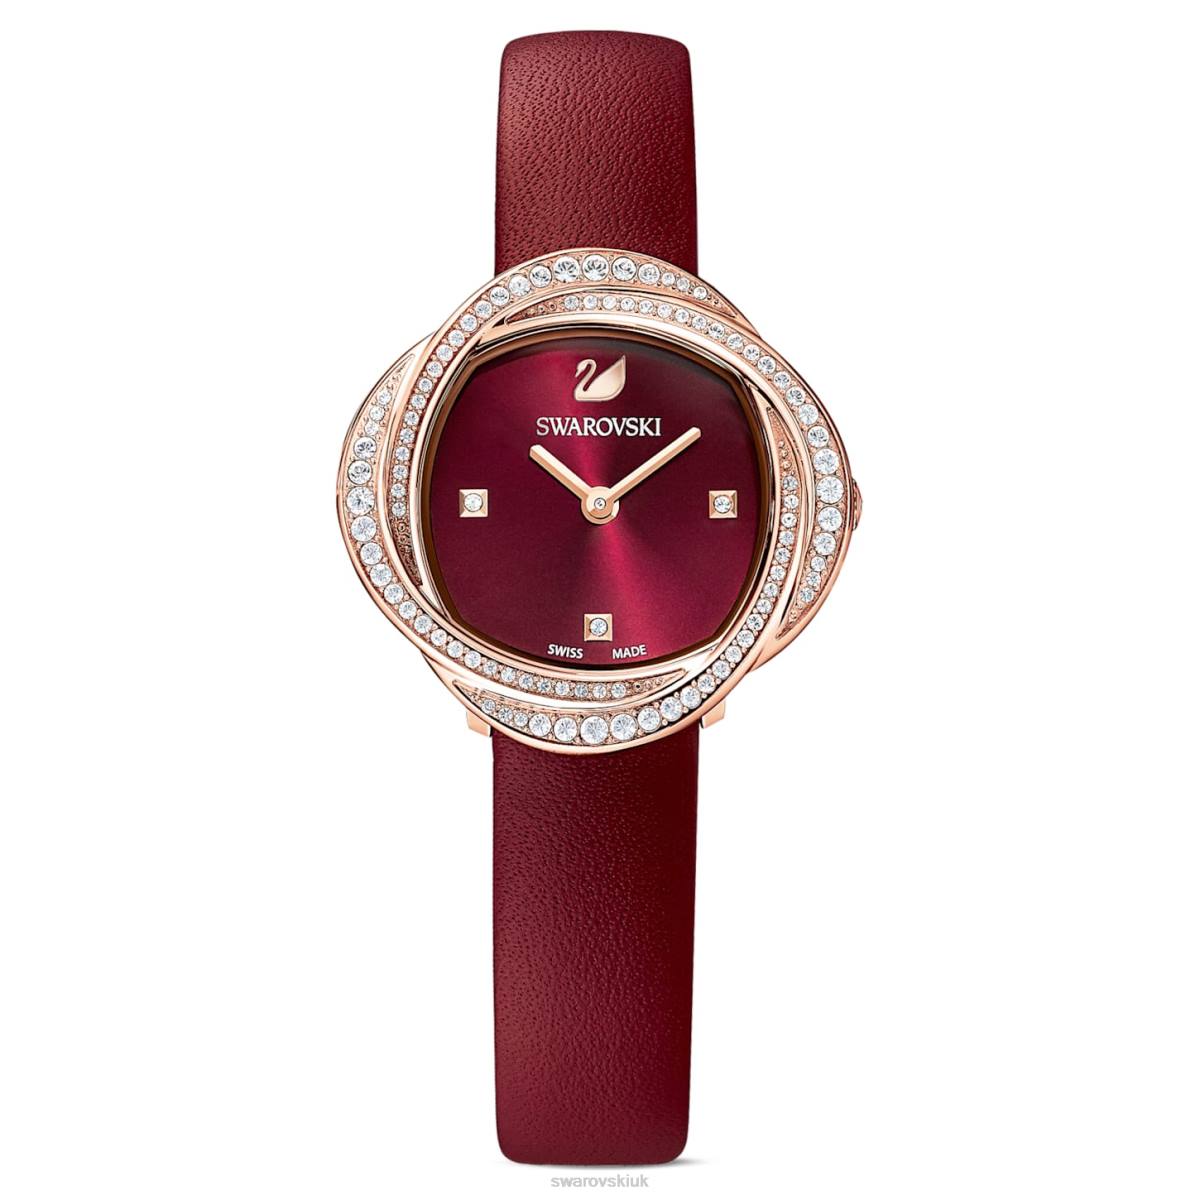 Accessories Swarovski Crystal Flower watch Swiss Made, Leather strap, Red, Rose gold-tone finish 48JX1201